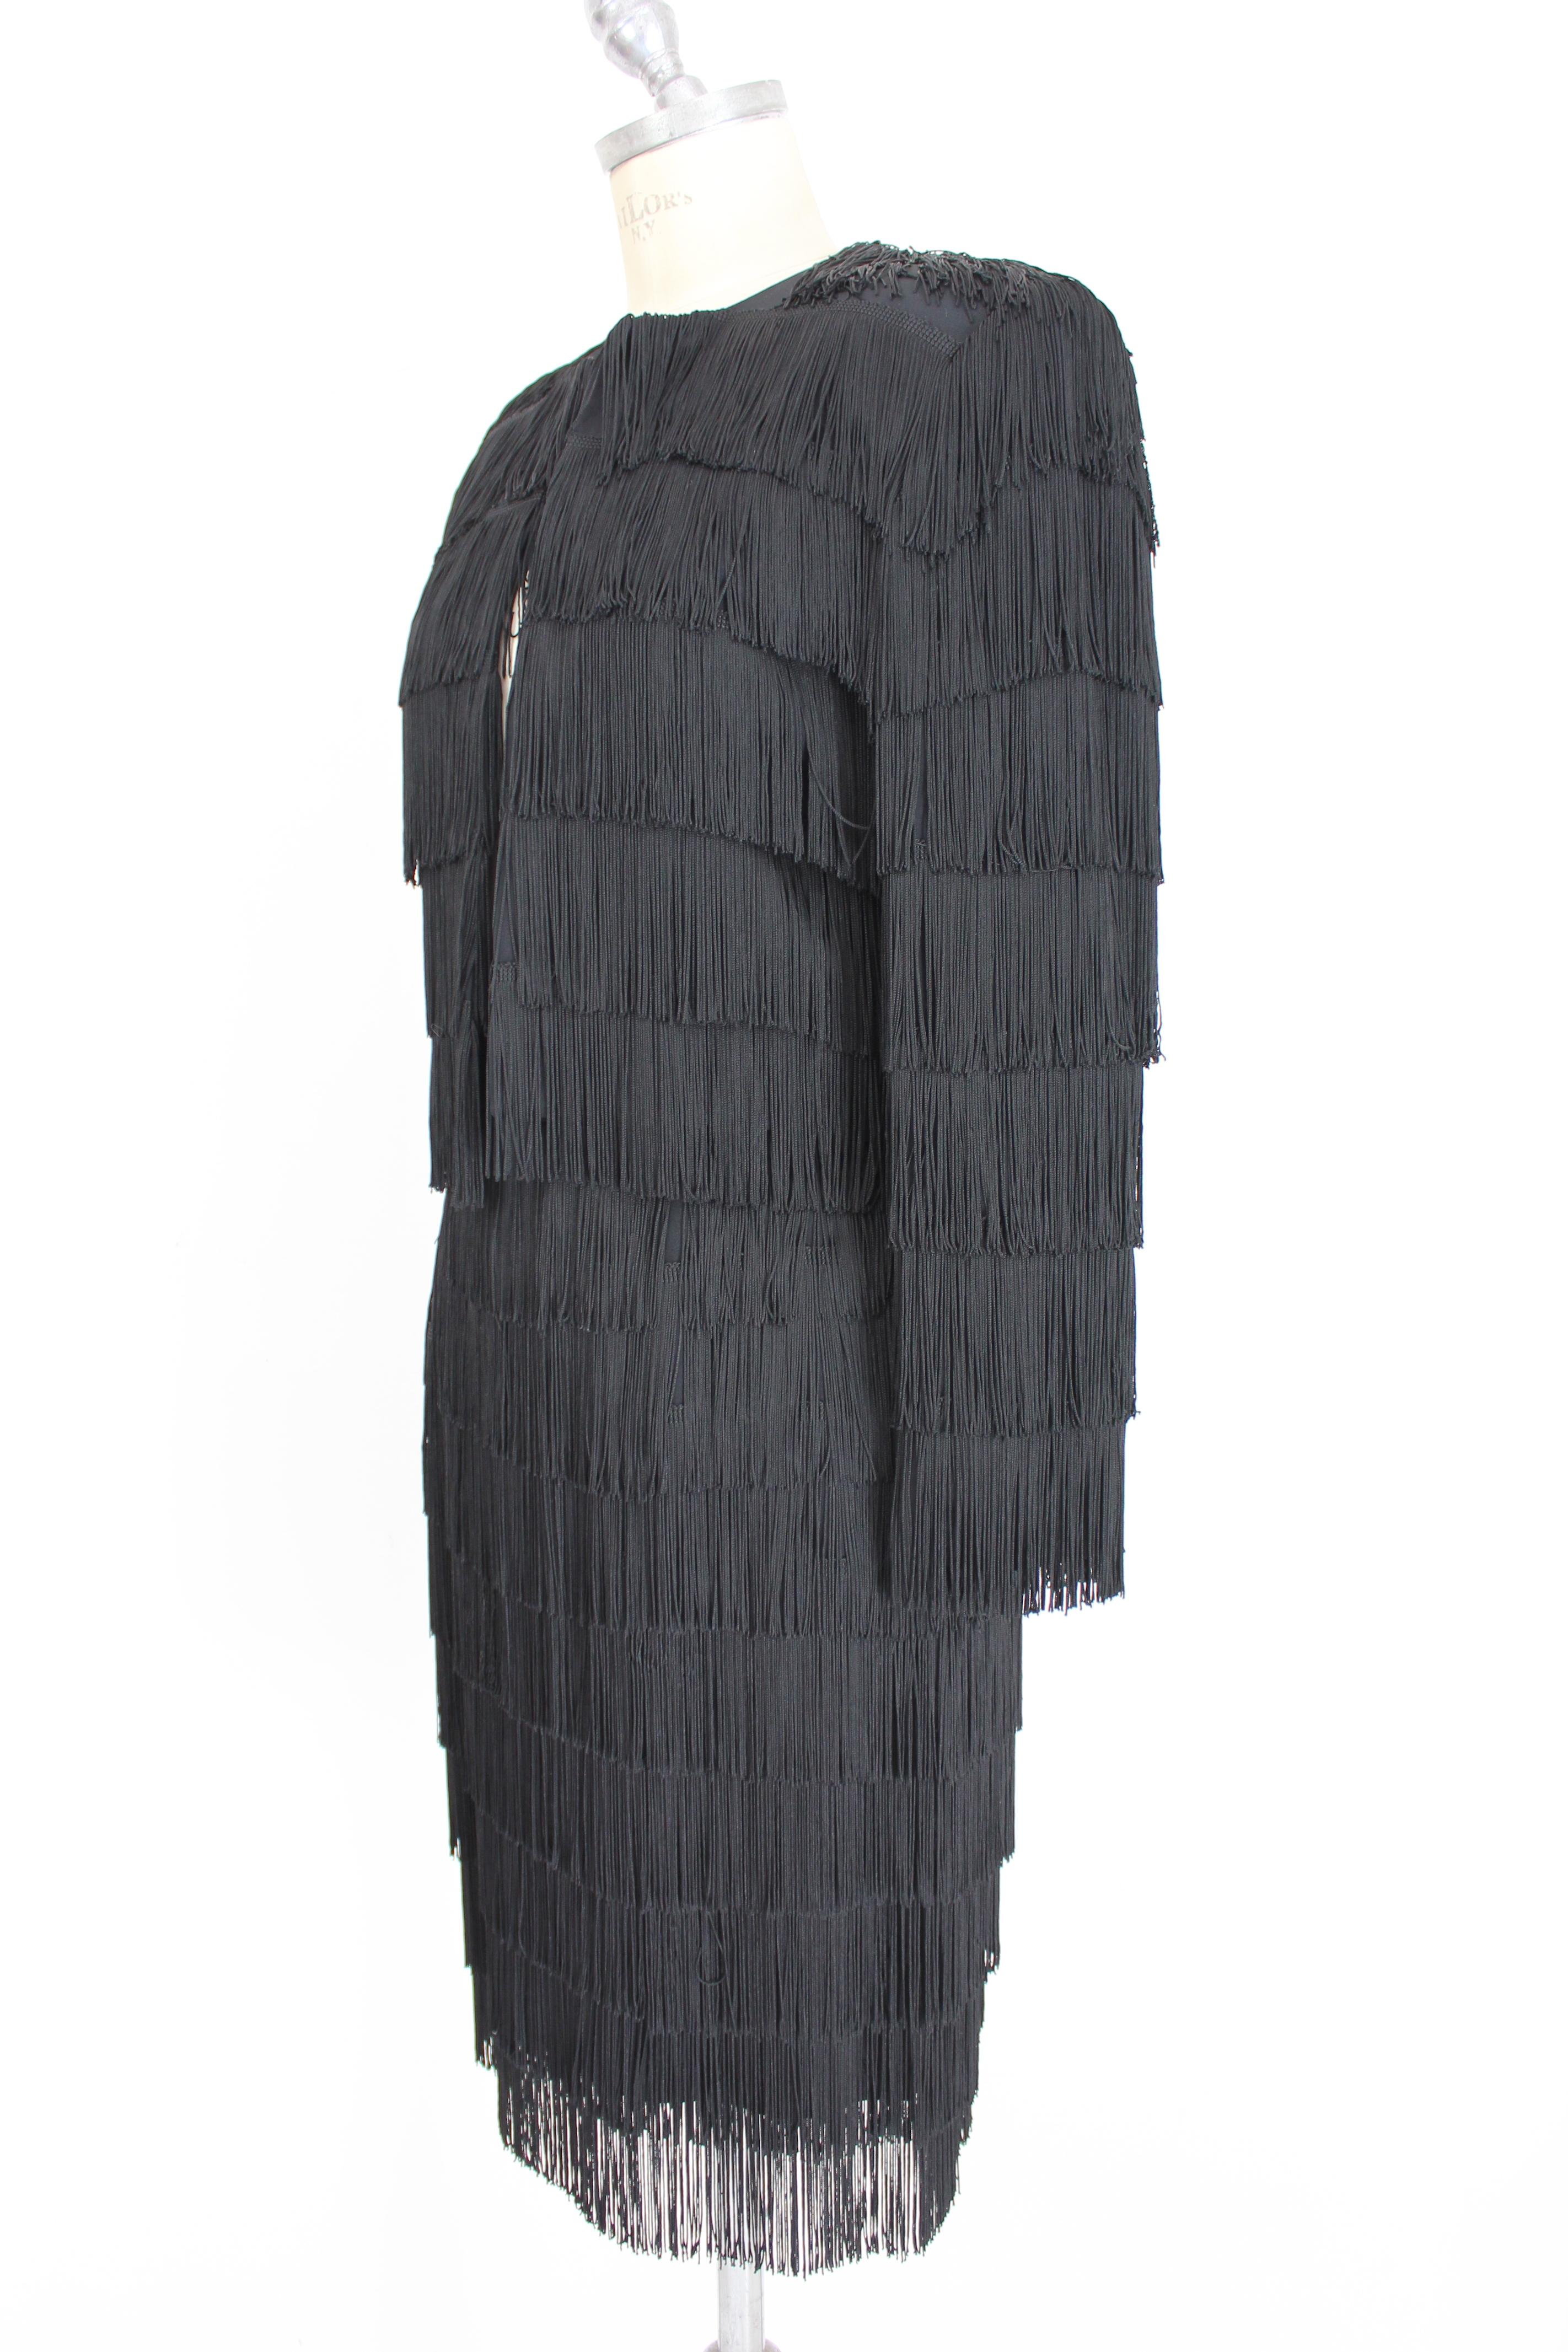 Moschino Black Fringed Charleston Evening Skirt Suit Dress 1990s In Excellent Condition In Brindisi, Bt